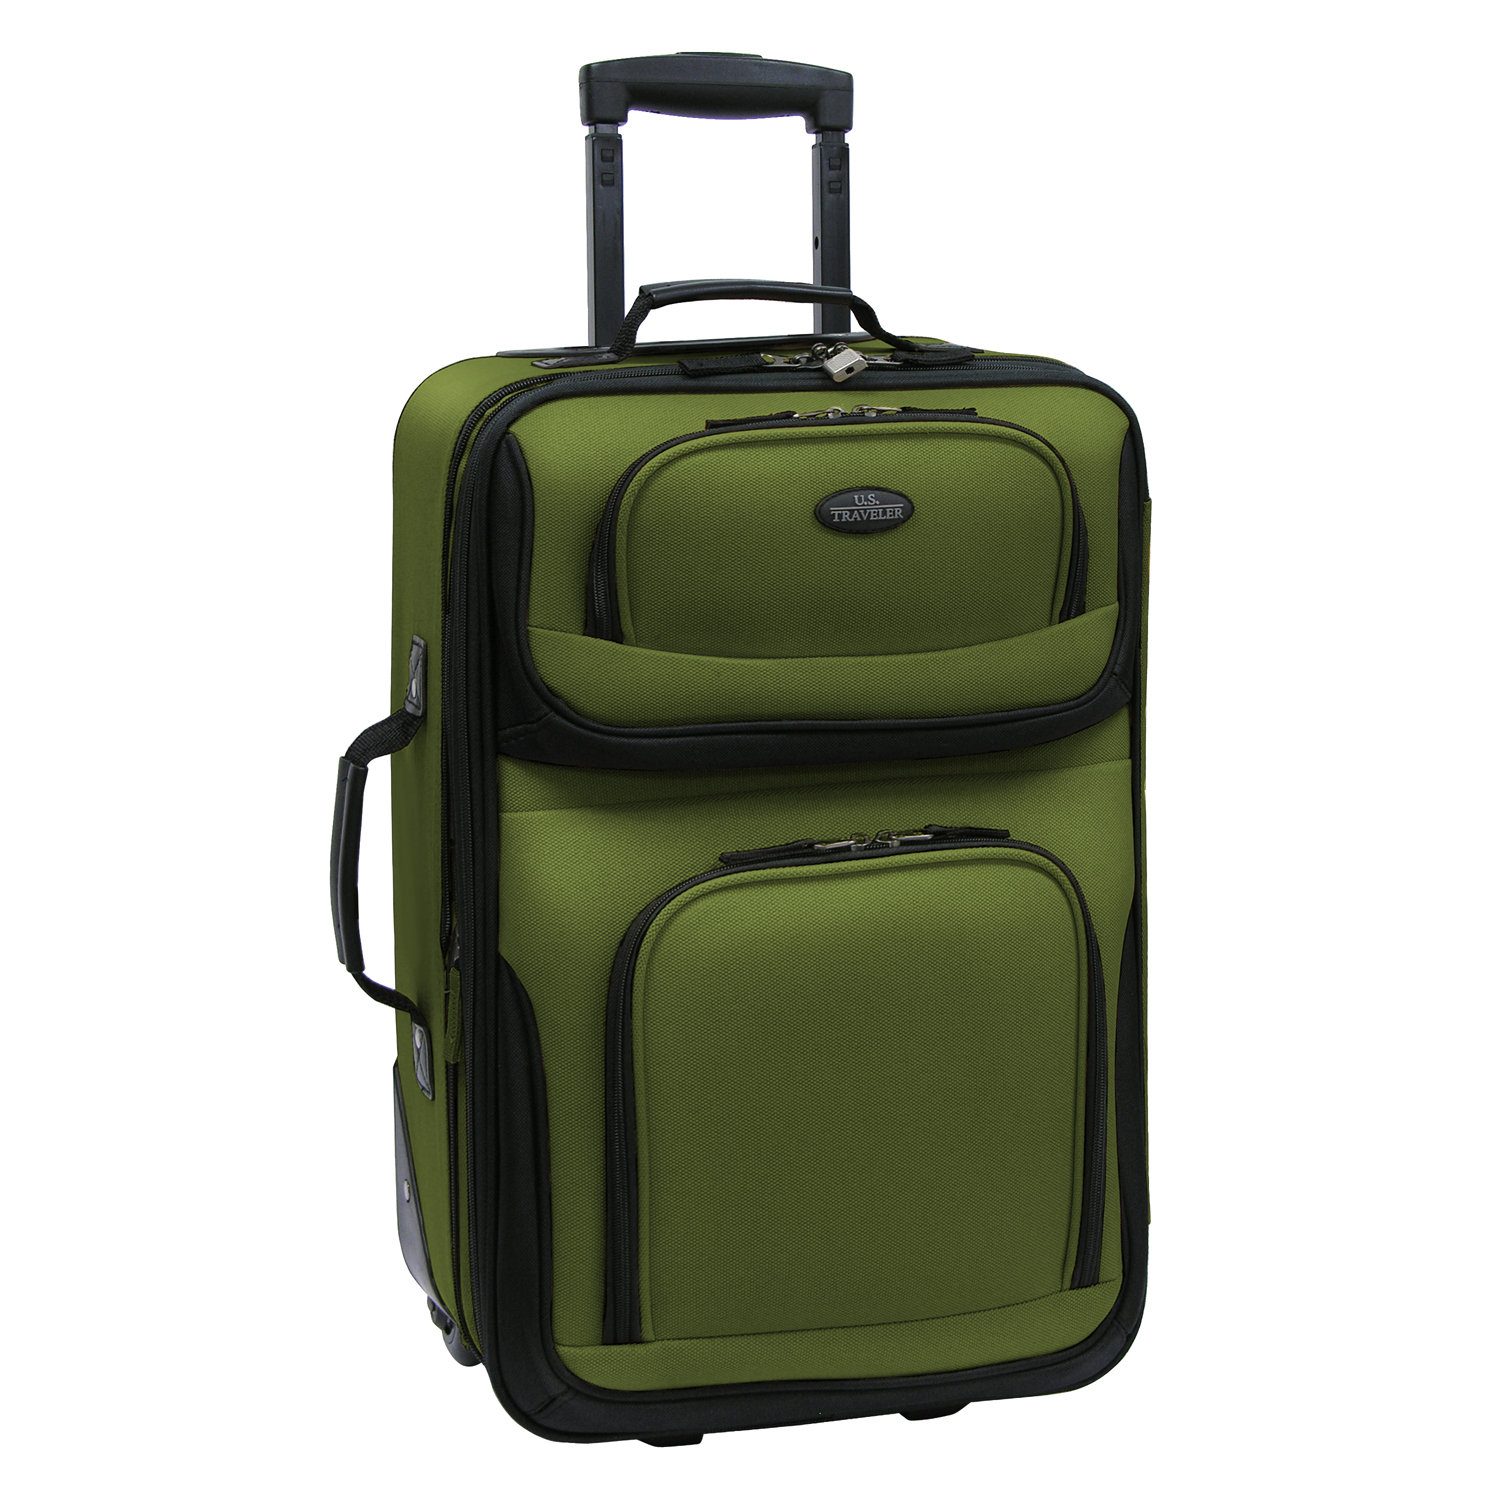 U.S. Traveler Rio Rugged Fabric Expandable Carry-on Luggage, 2 Wheel Rolling Suitcase, Green, 2-Piece - image 4 of 7